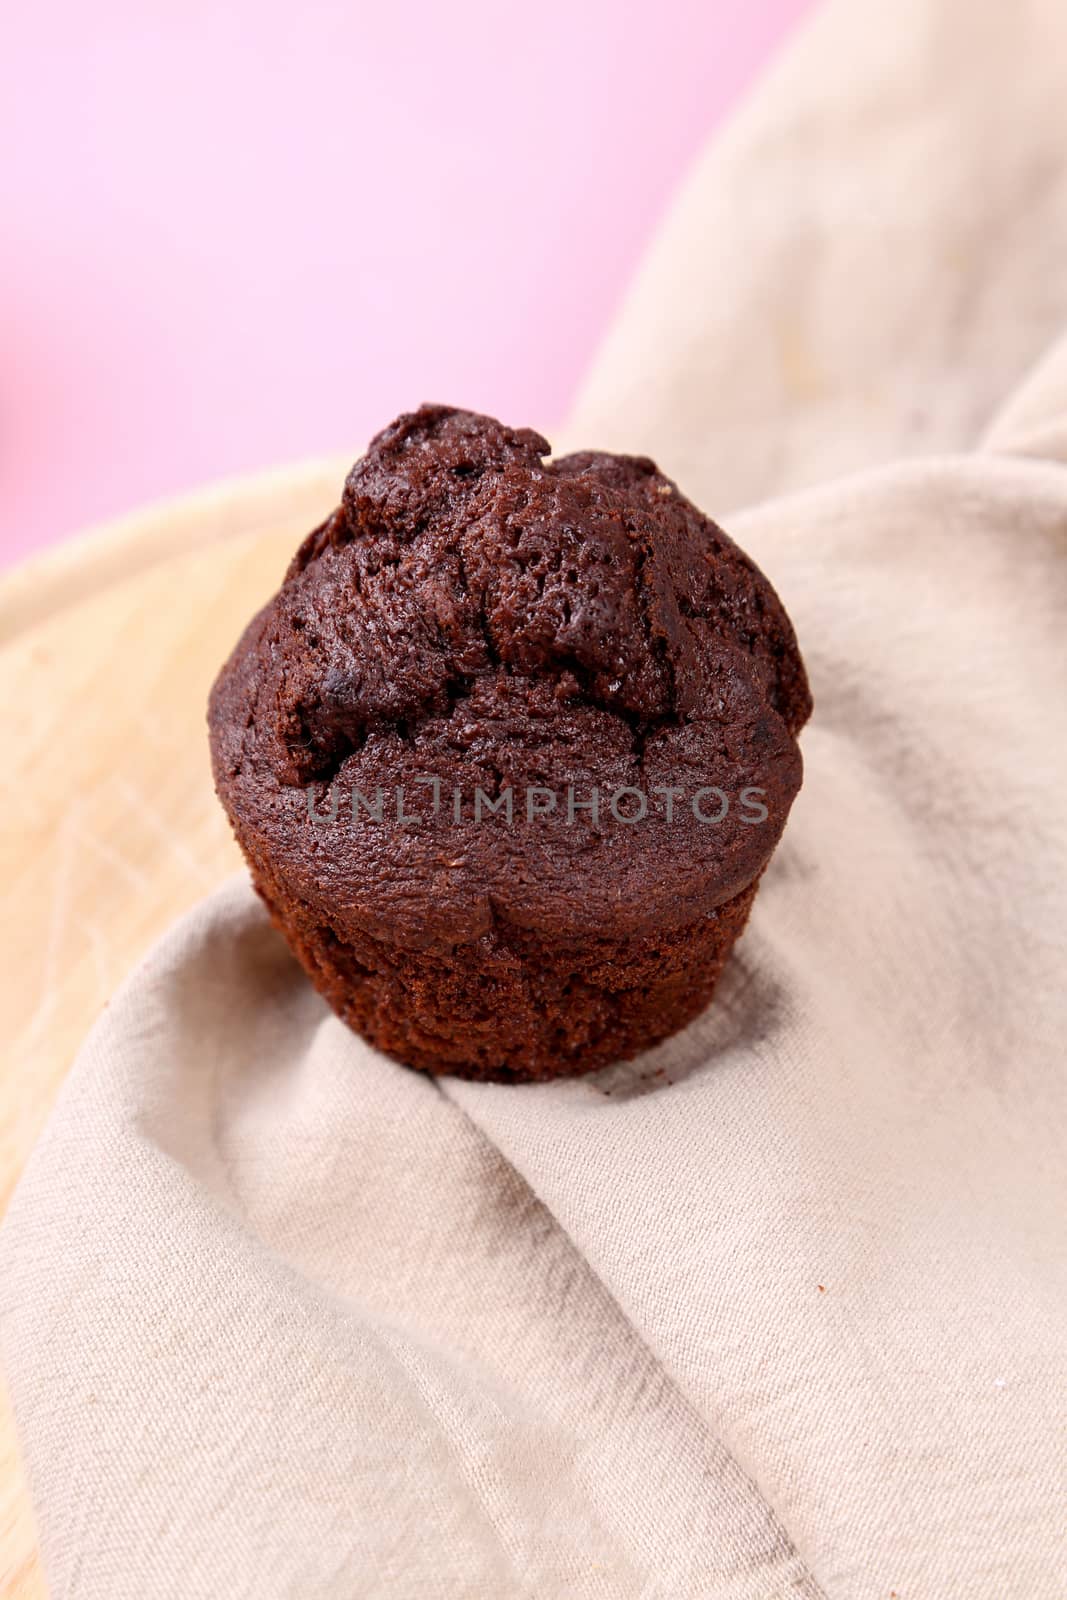 Delicious muffin on the table